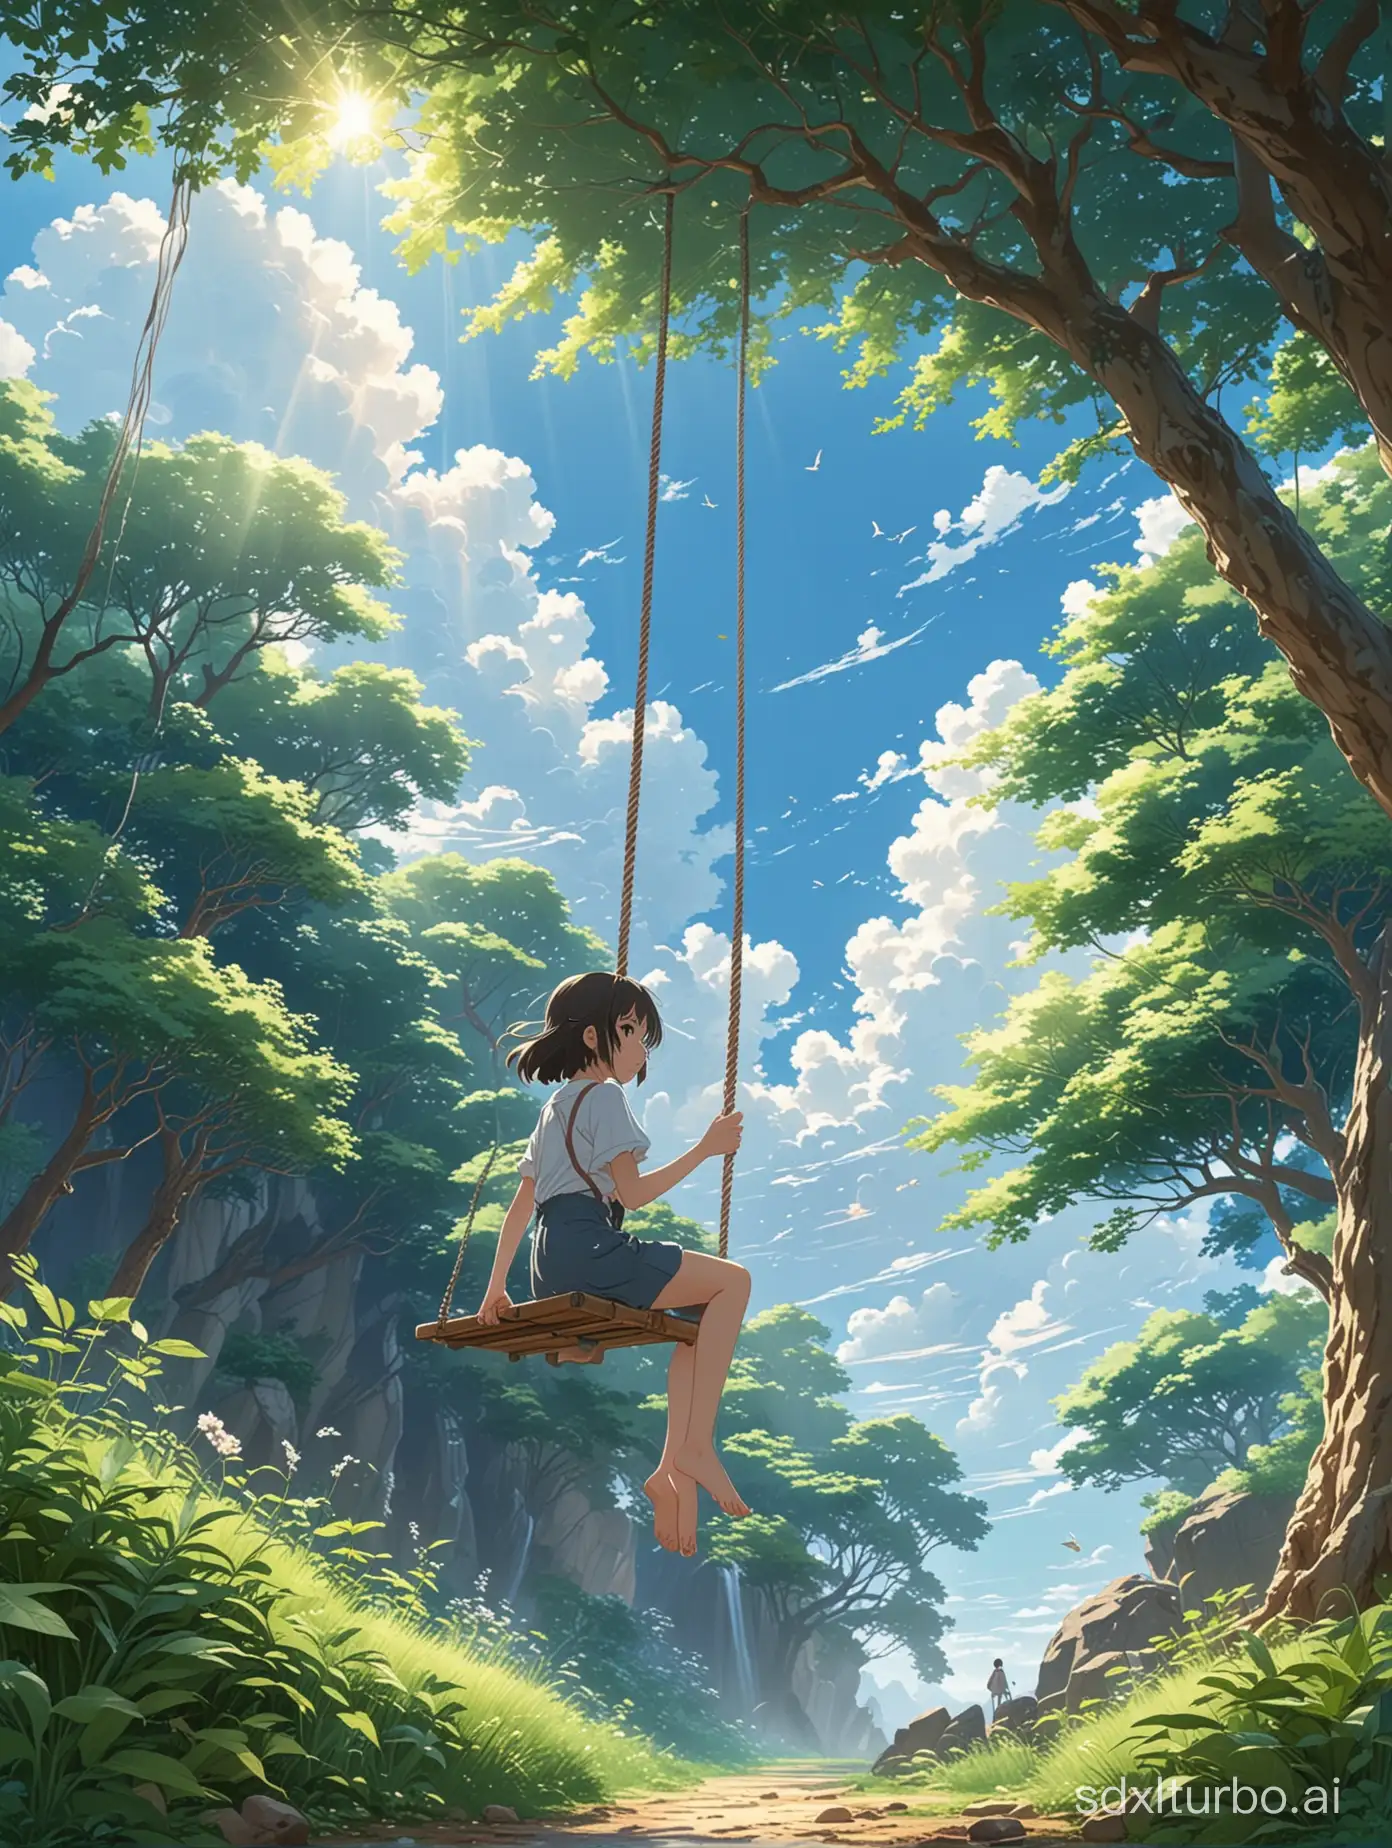 A serene Makoto Shinkai-inspired anime scene, featuring a young girl sitting on a wooden swing, suspended from a large tree with lush green leaves. The sky is a clear blue, adorned with fluffy white clouds. The ground beneath her is rocky and uneven, blending harmoniously with the natural setting. Sunlight filters through the leaves, casting a dappled light on the ground, creating a sense of tranquility and harmony with nature.vivid